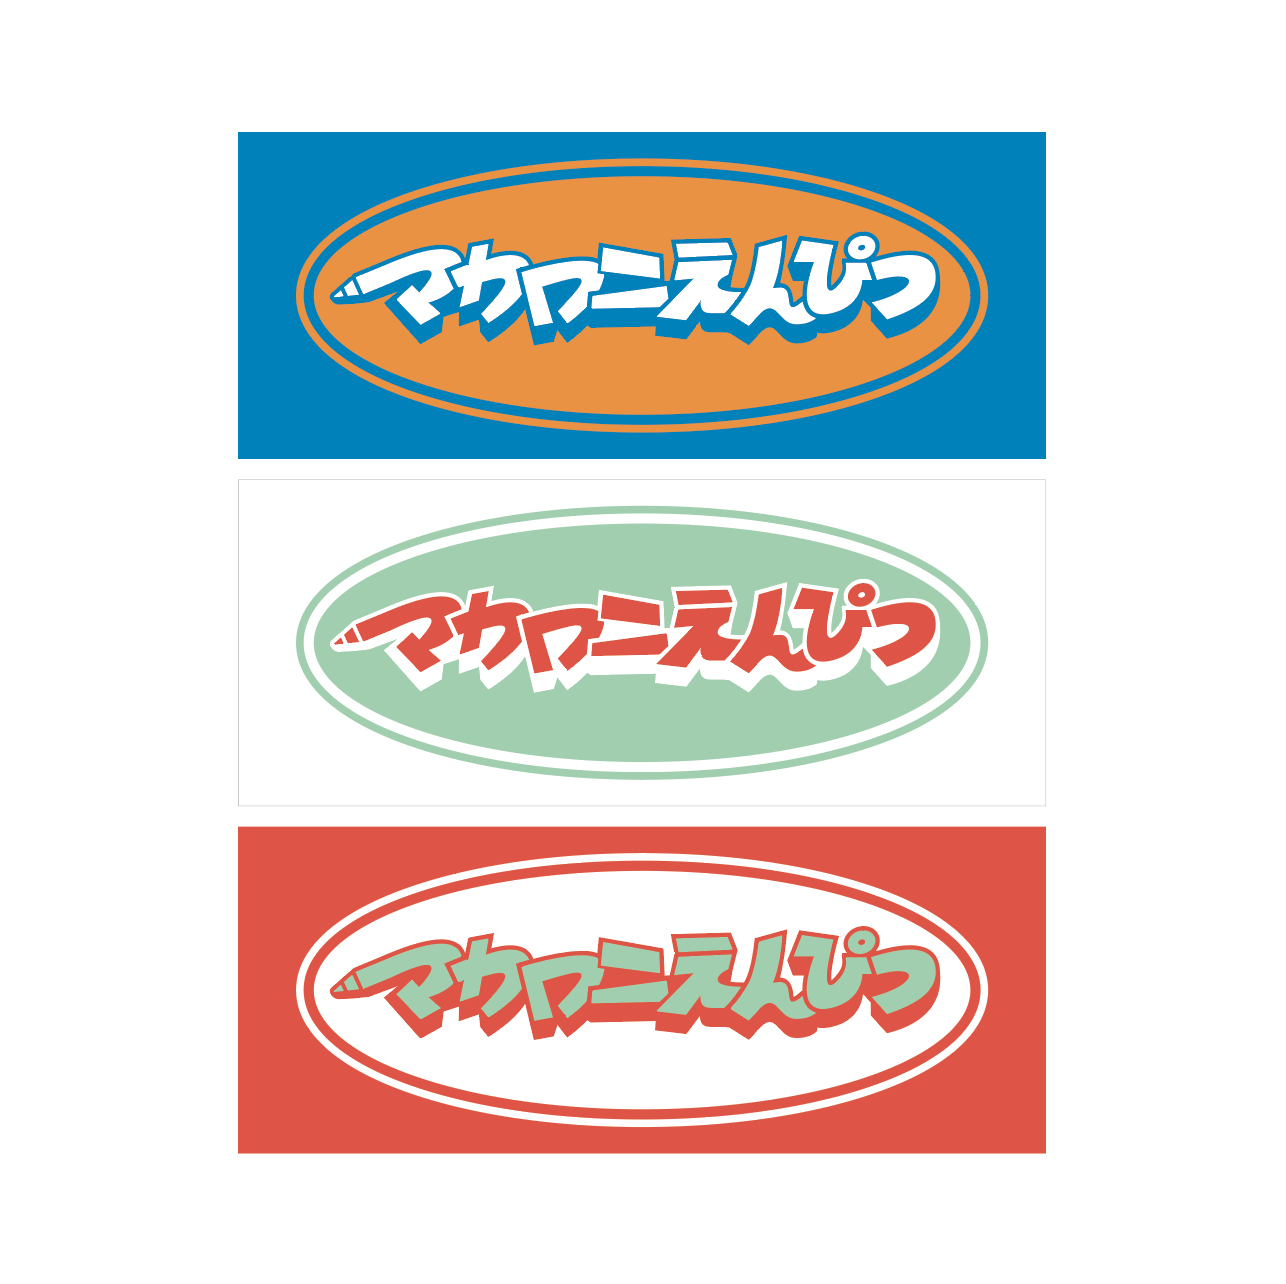 GOODS｜マカロニえんぴつ Official Website